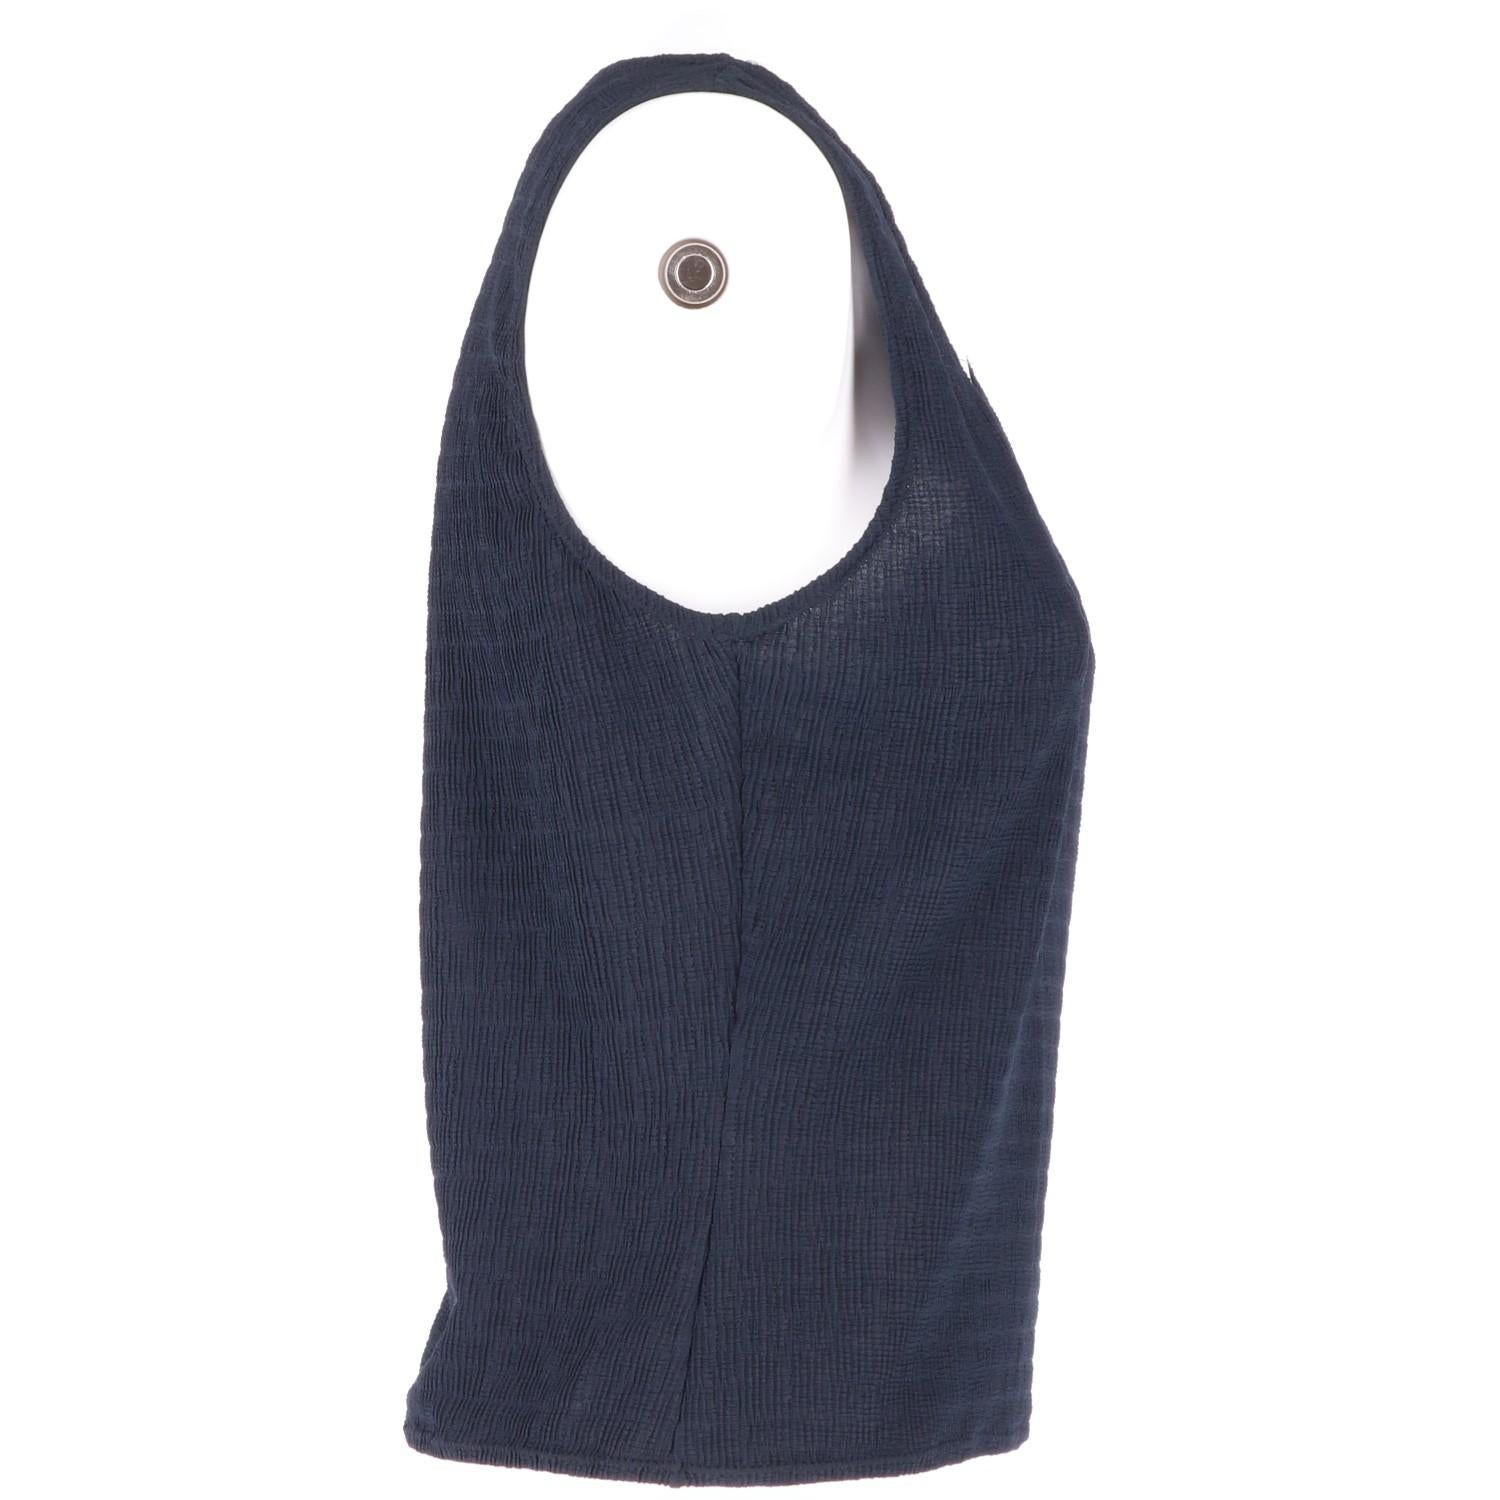 Emporio Armani navy blue viscose shoulder strap top with round neckline.

Years: 90s

Made in Italy

Size: 42 IT

Linear measures

Height: 50 cm
Bust: 43 cm